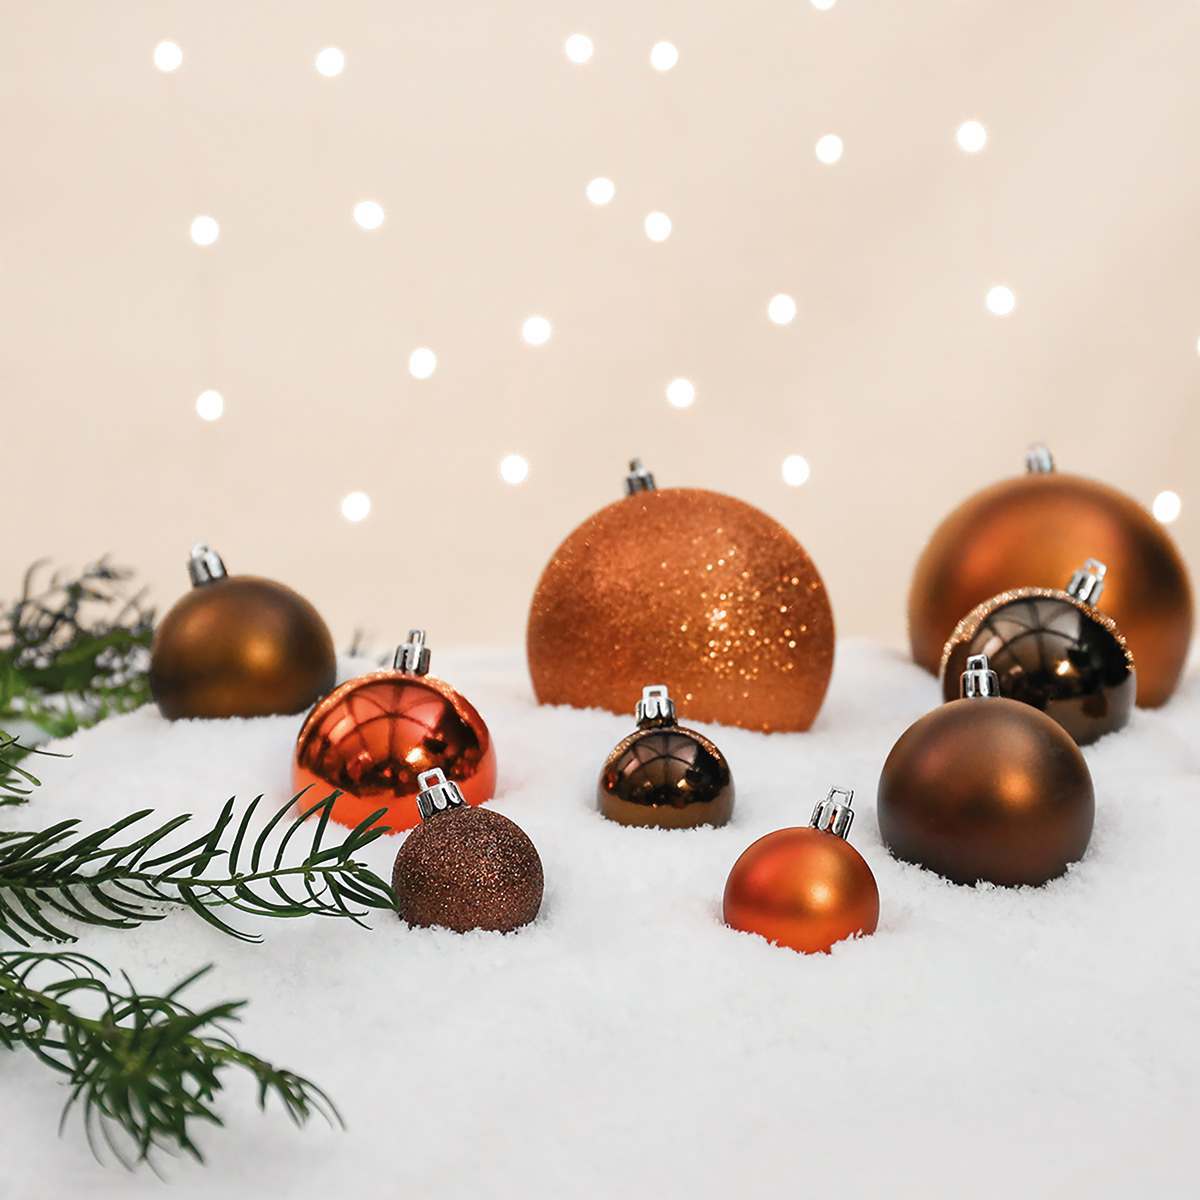 Chocolate Baubles Christmas Tree Pack of 10-60mm Shatterproof Baubles 